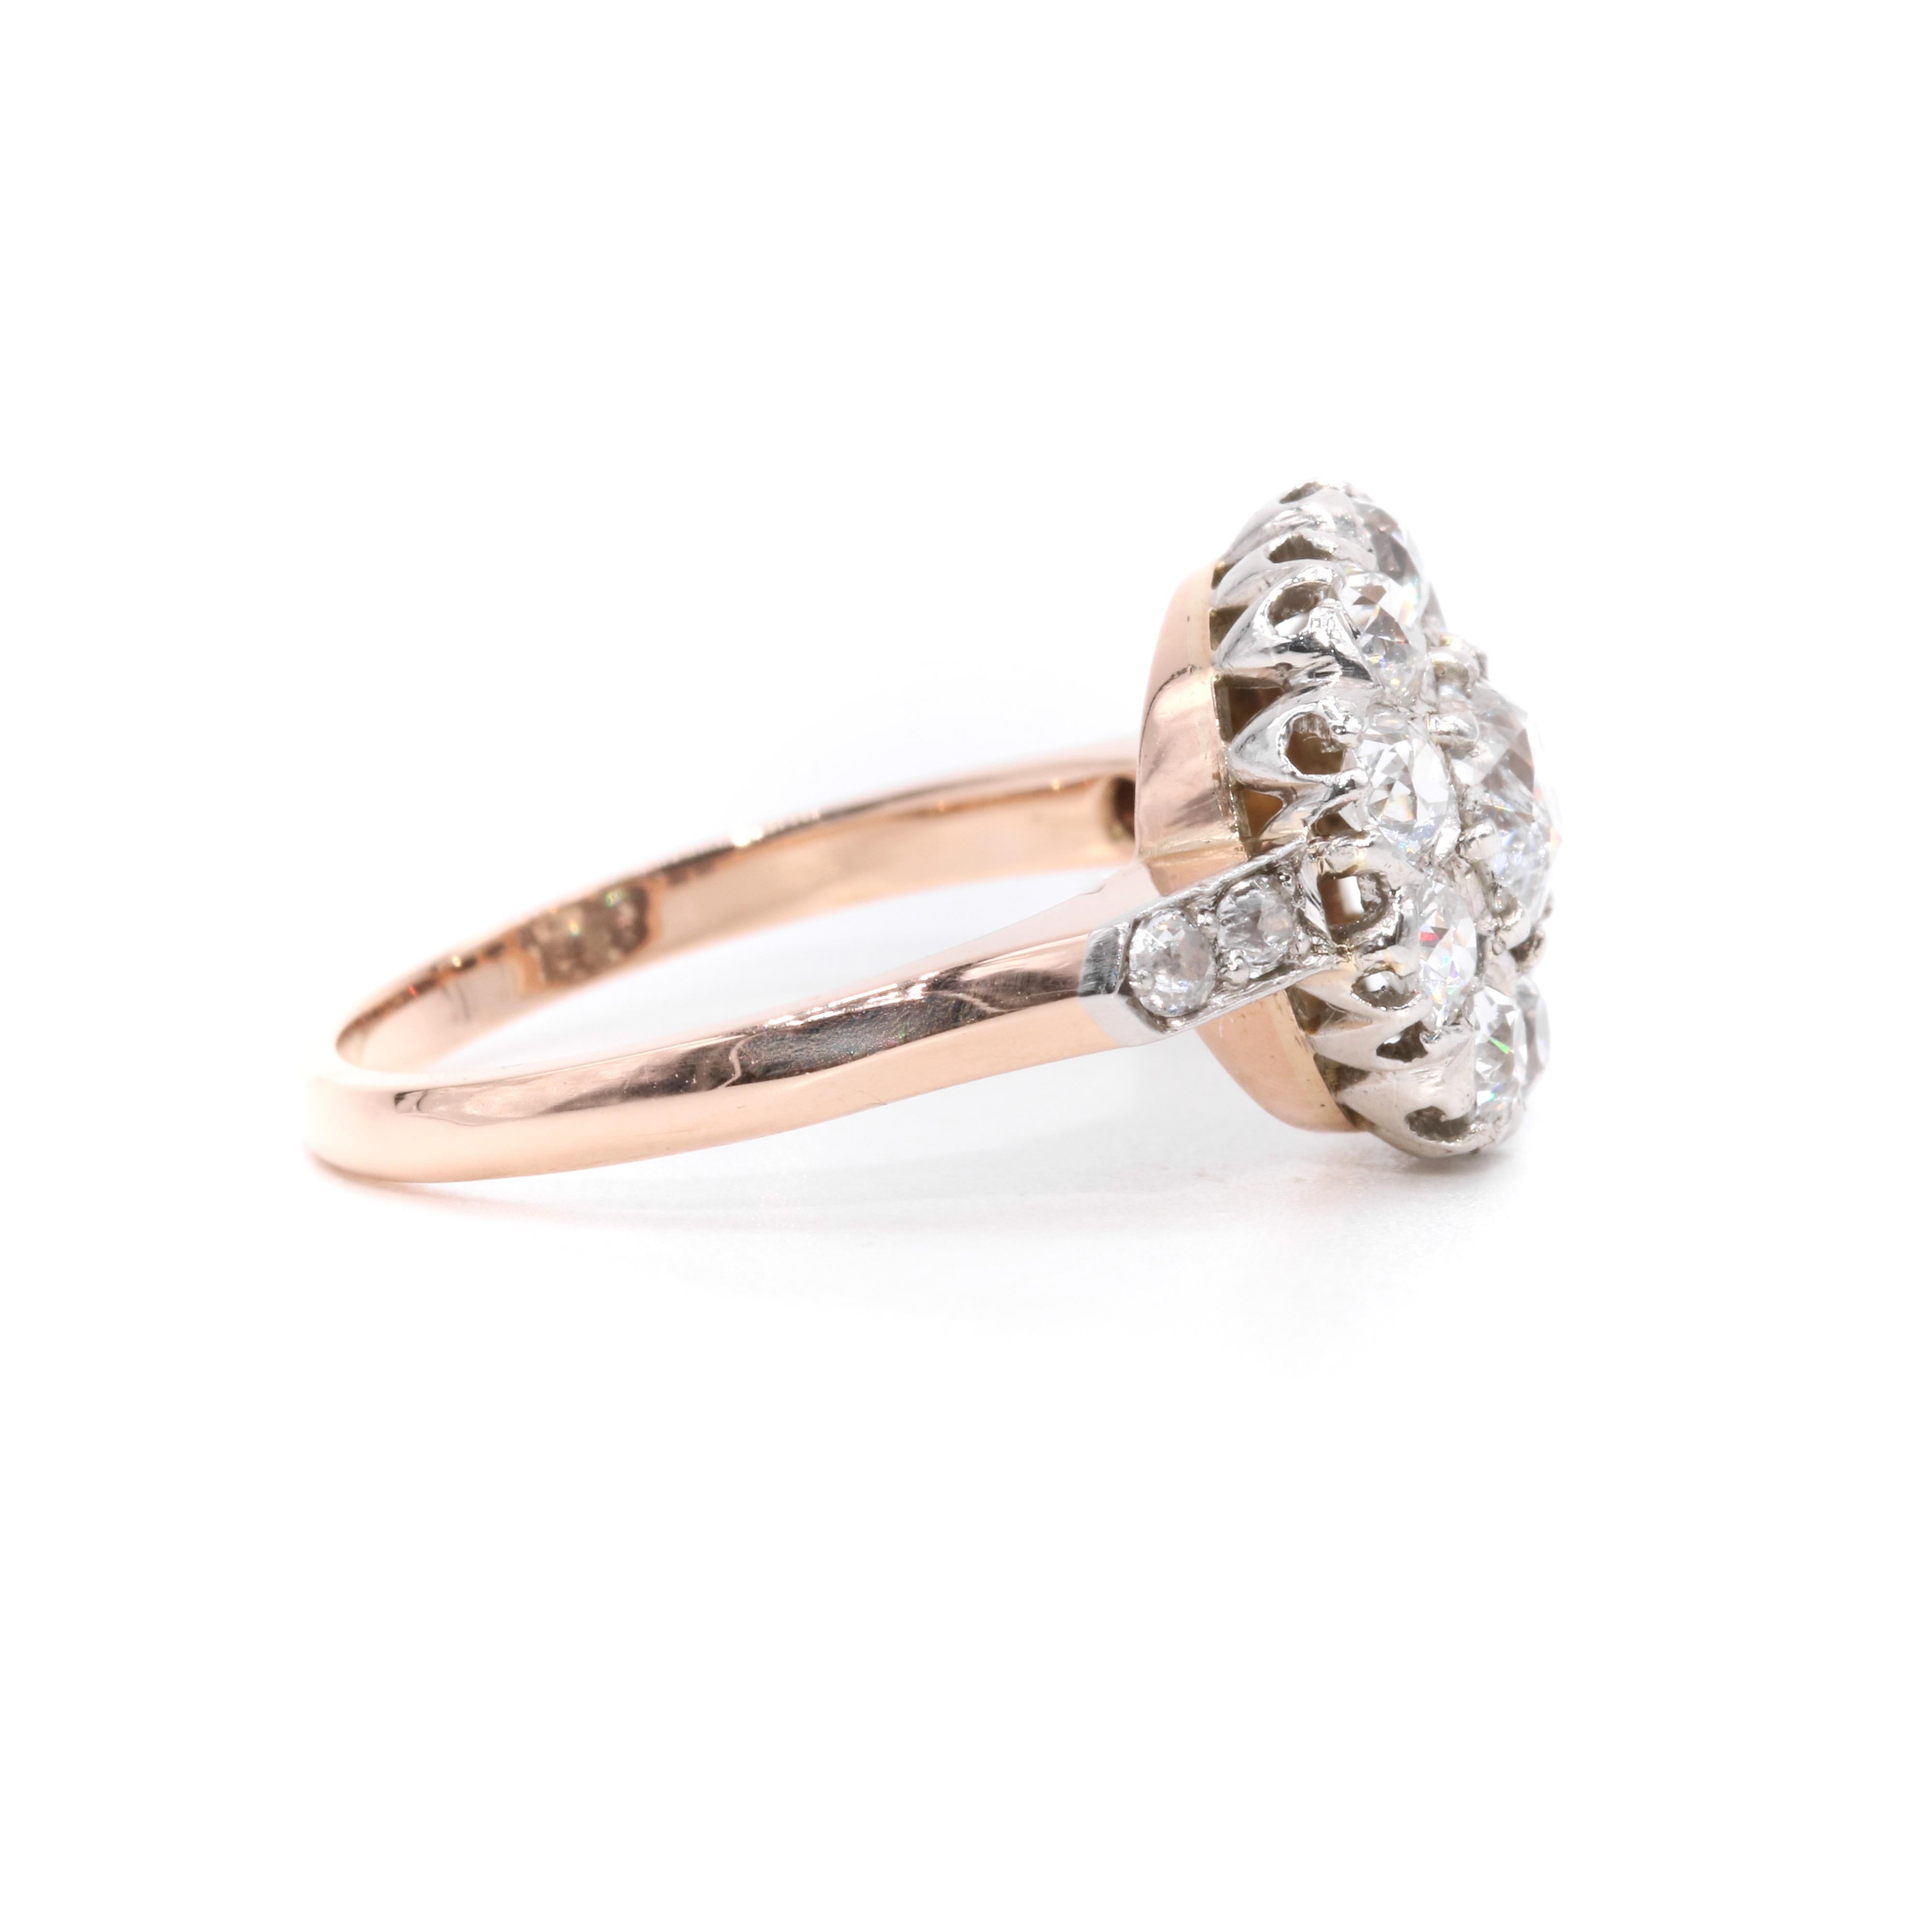 Antique Edwardian 18K Rose Gold and Platinum 1.89ctw Diamond Daisy Cluster Ring For Sale 1